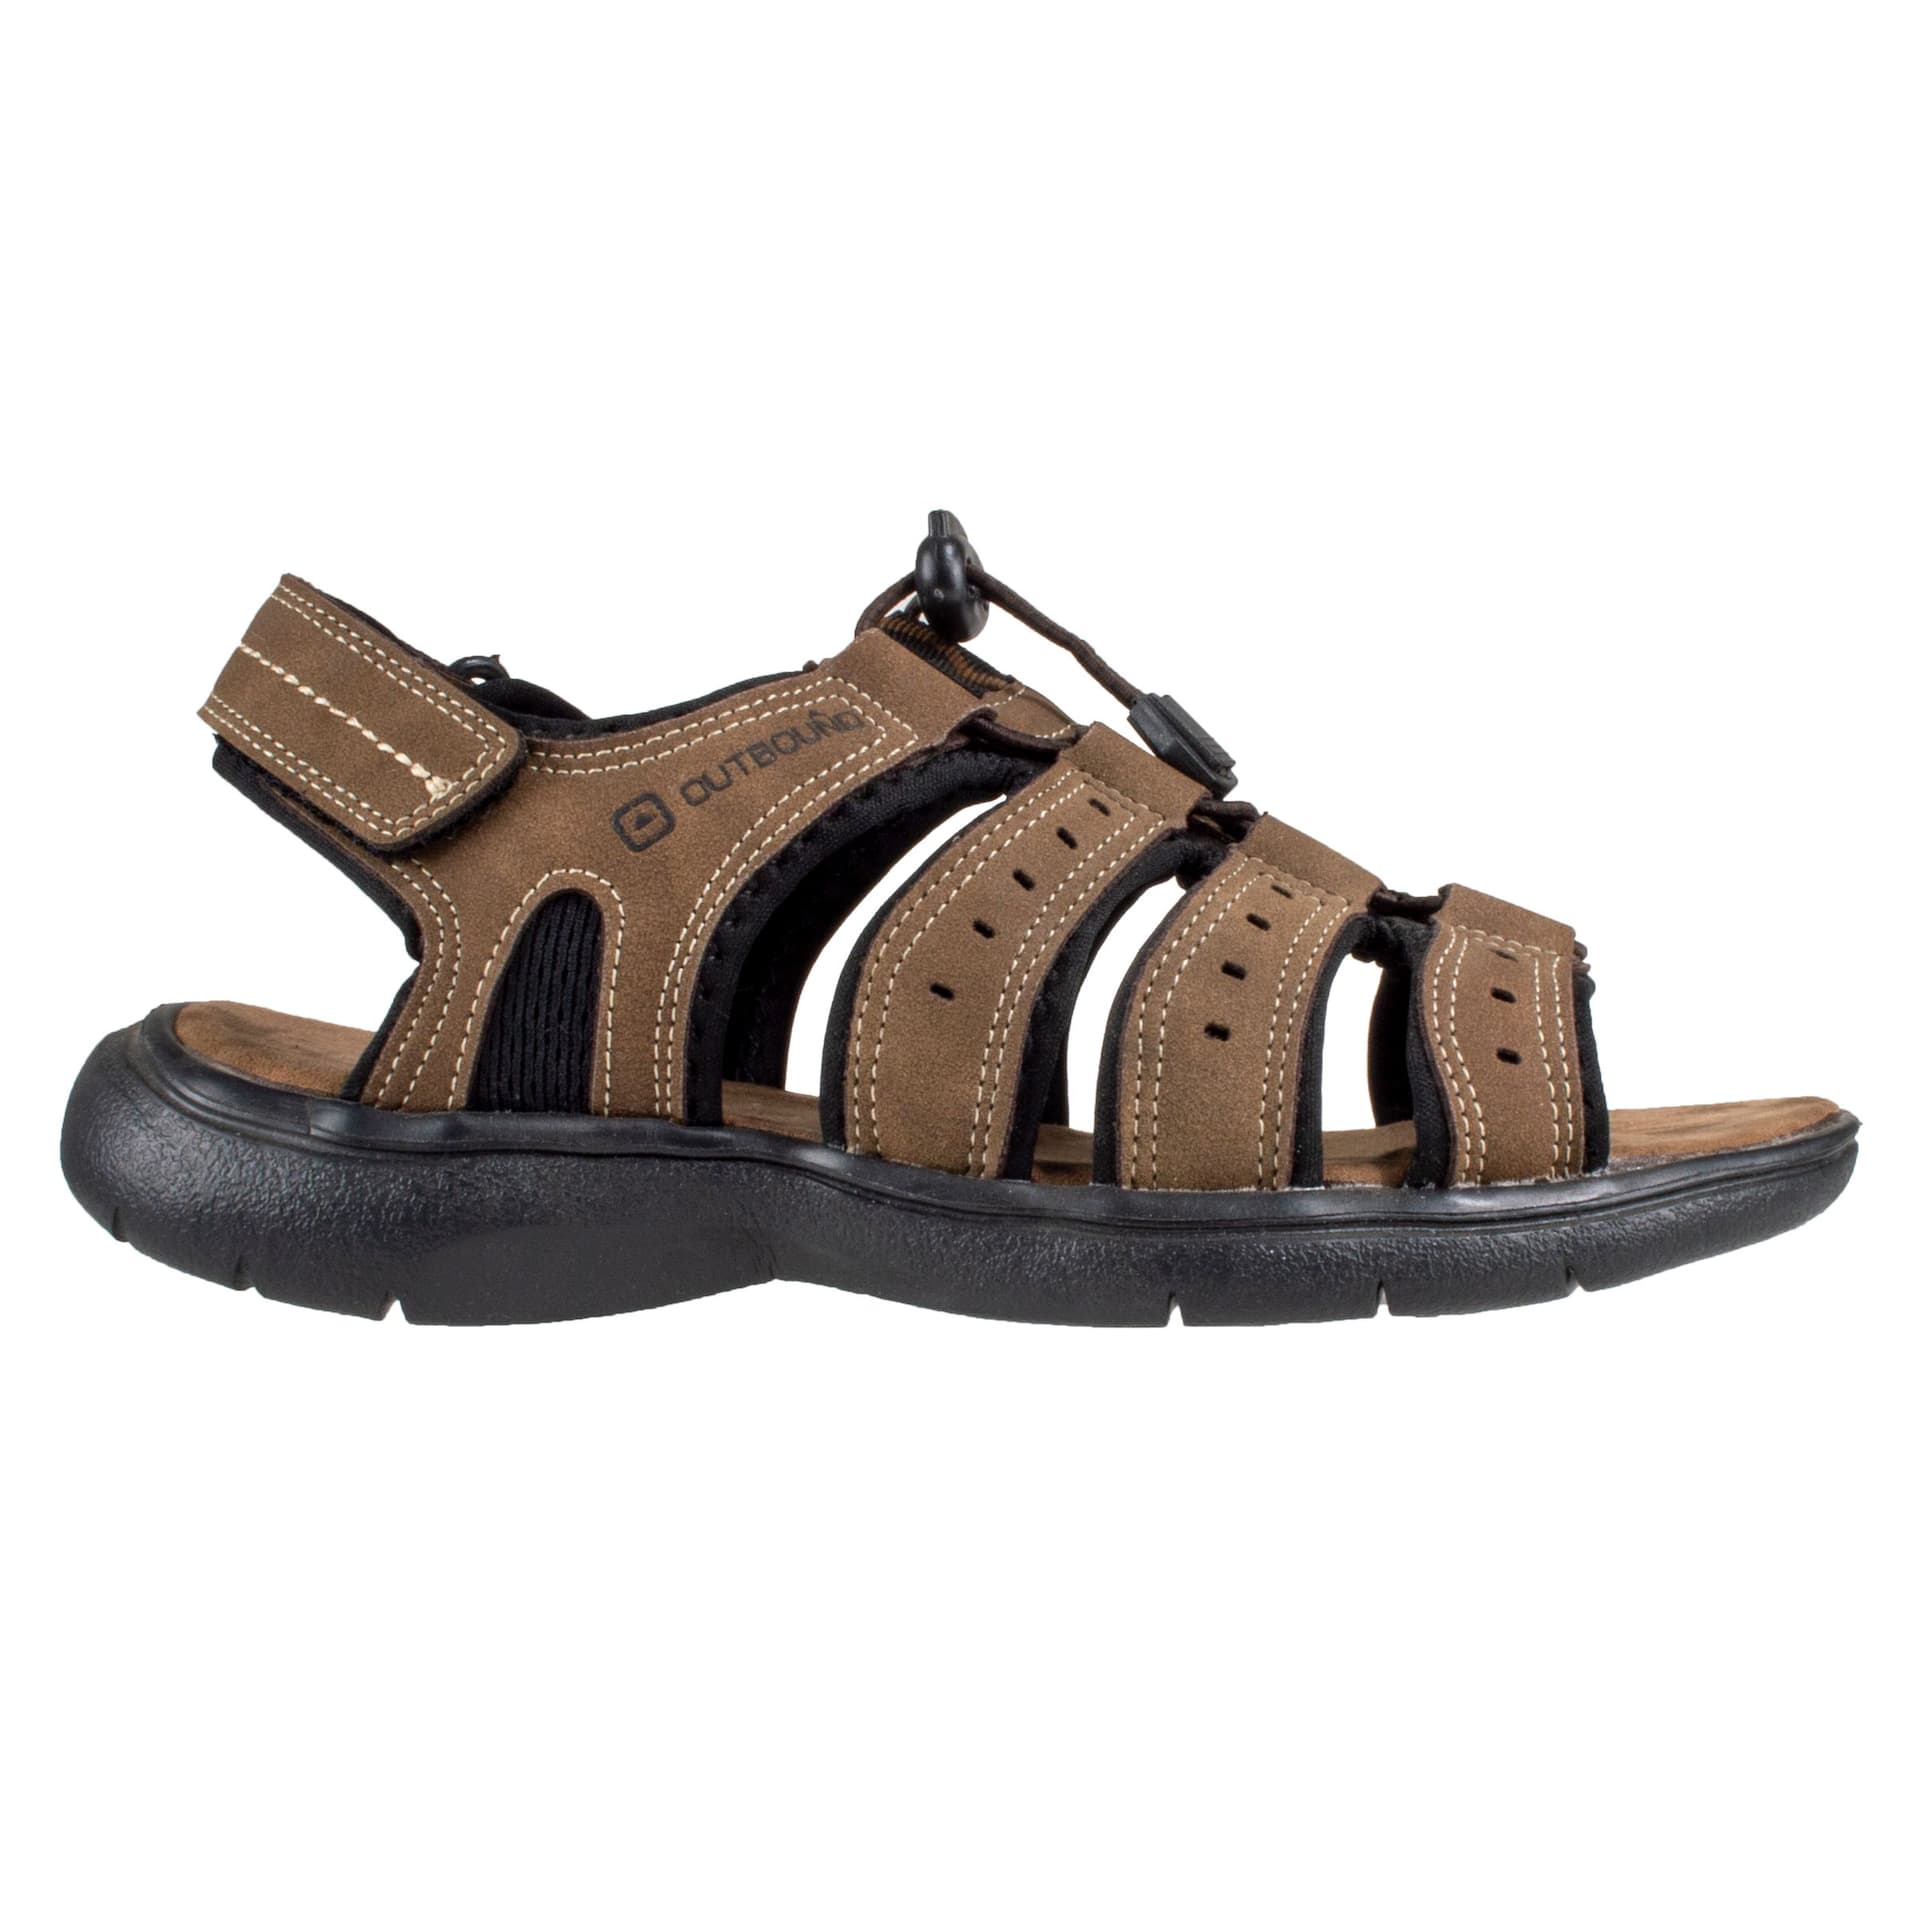 Outbound Men's Bungee Sandals with Velcro® Closure Straps, Durable